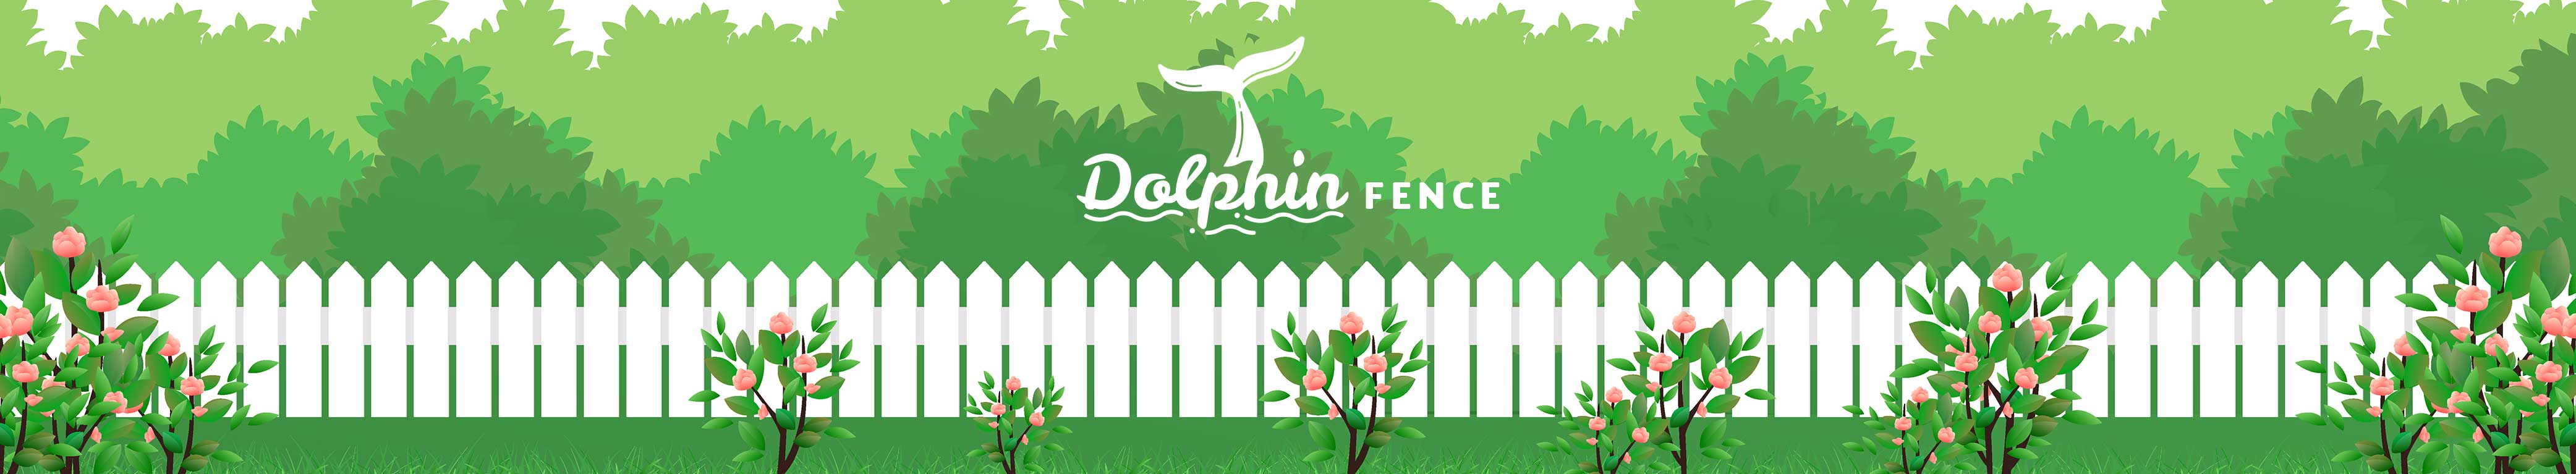 Dolphin Fens Banner Image